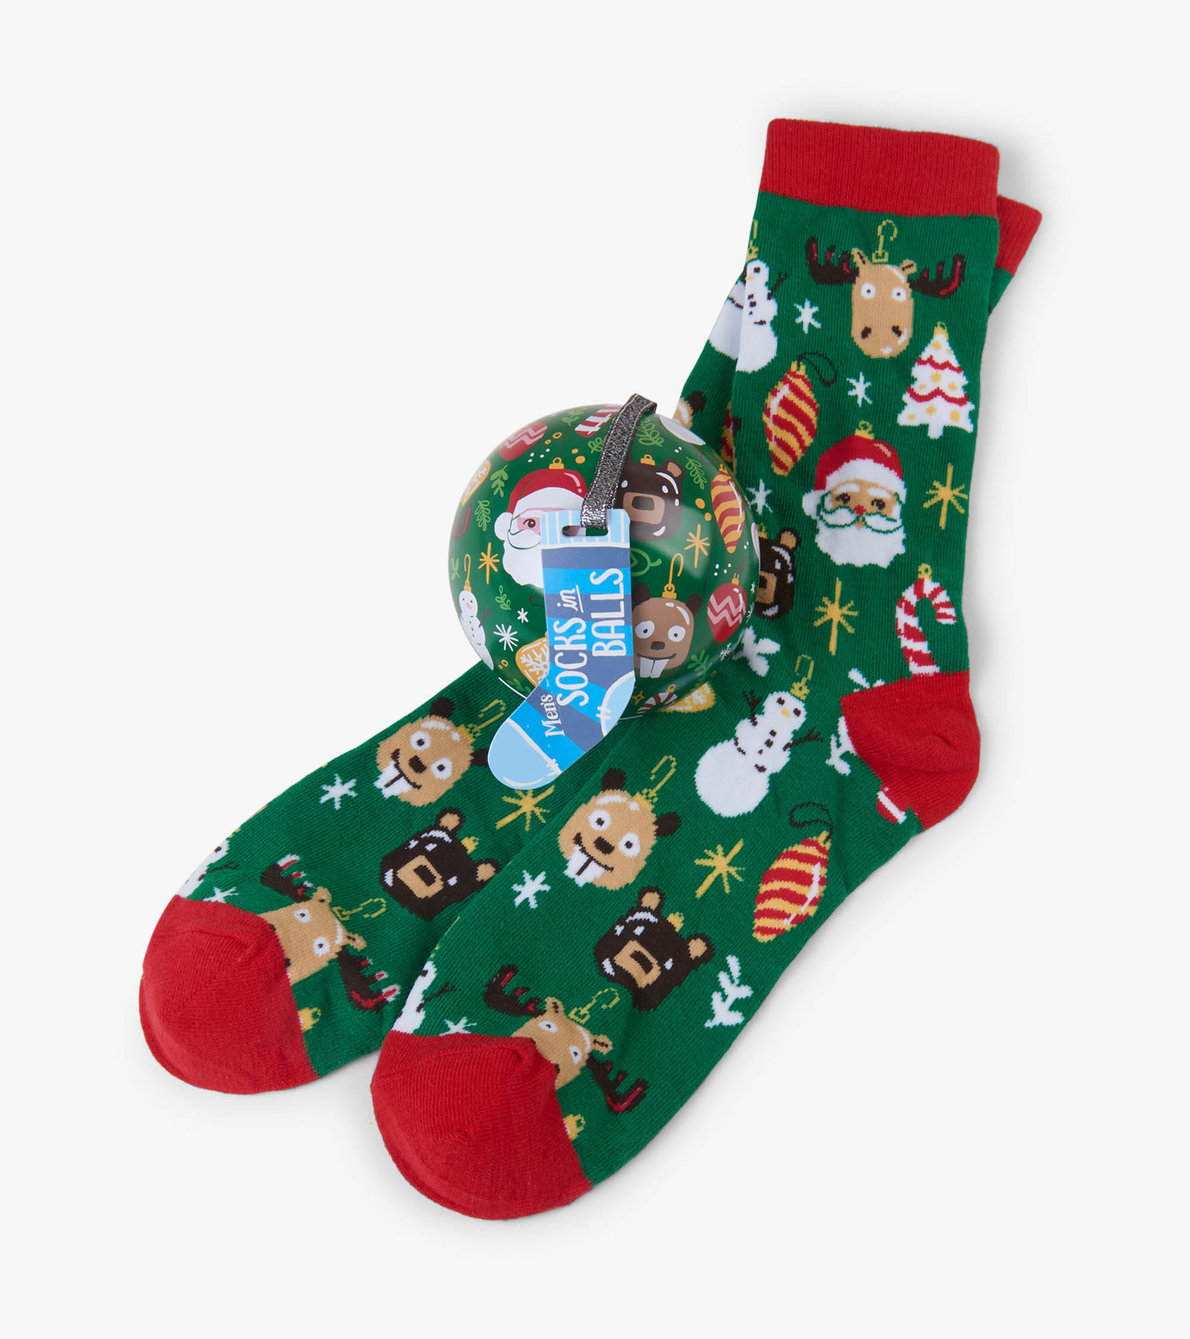 View larger image of Holiday Ornaments Men's Socks in Balls